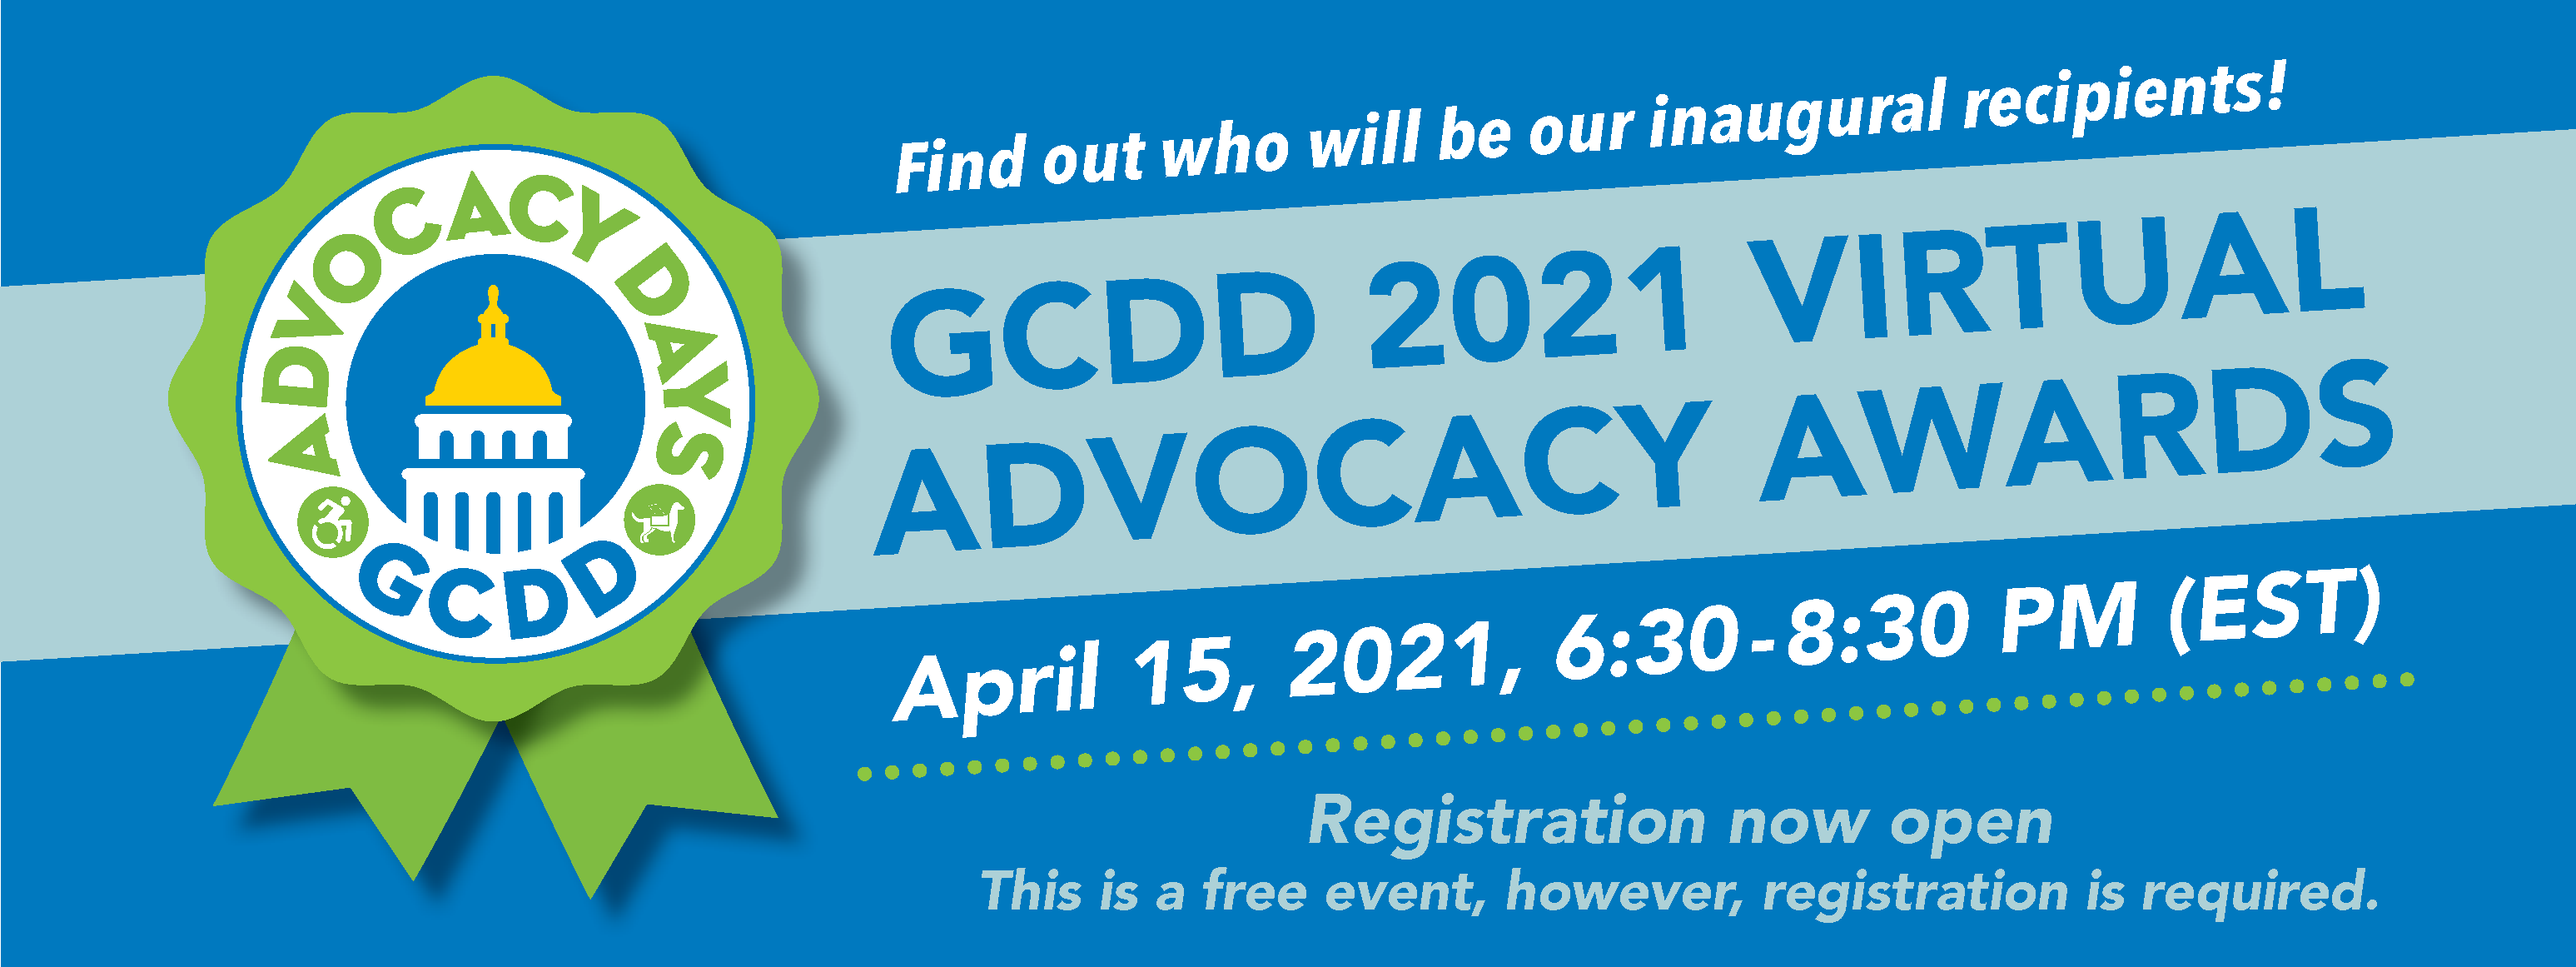 GCDD 2021 Virtual Advocacy Awards Register now April 15, 2021, 6:30PM-8:30PM (EST)  This is a free event, however, registration is required. 